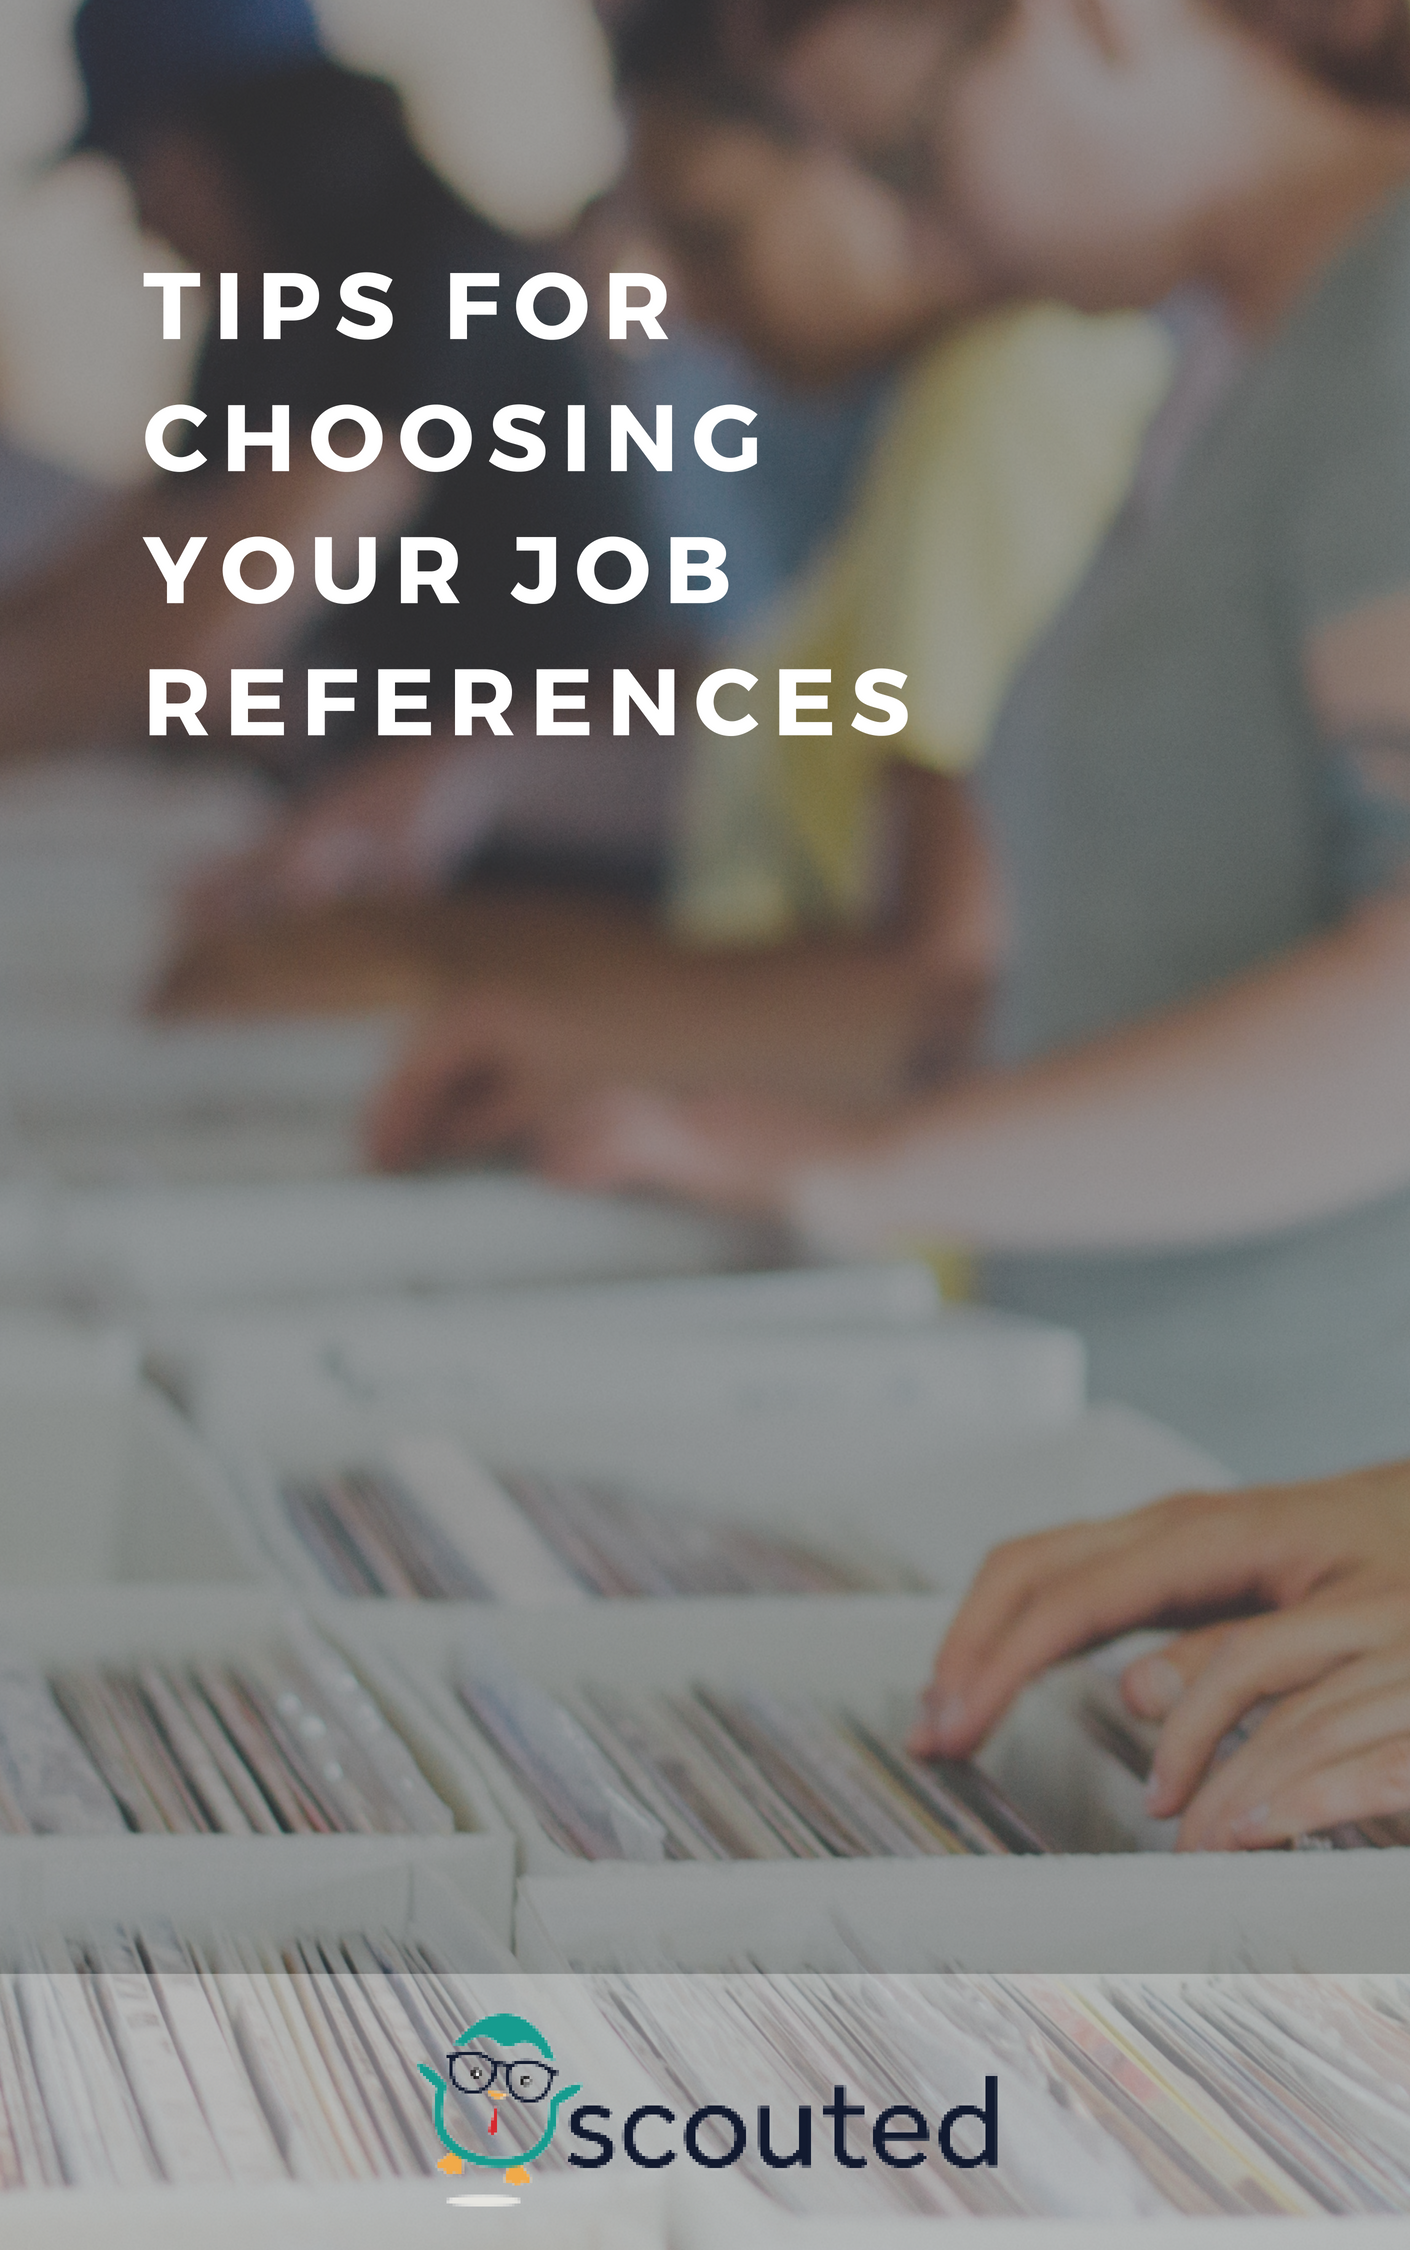 References might be a bigger deal than you think. Believe It or not, references can make or break your job prospects, so it’s extremely important to choose them wisely. Even if you had a great interview, a word from one of your references is all it could take to have the hiring manager second-guess you as the right candidate, or get the vote of confidence they need to bring you onto the team. So in a world of Amazon reviews, make sure yours are five stars!